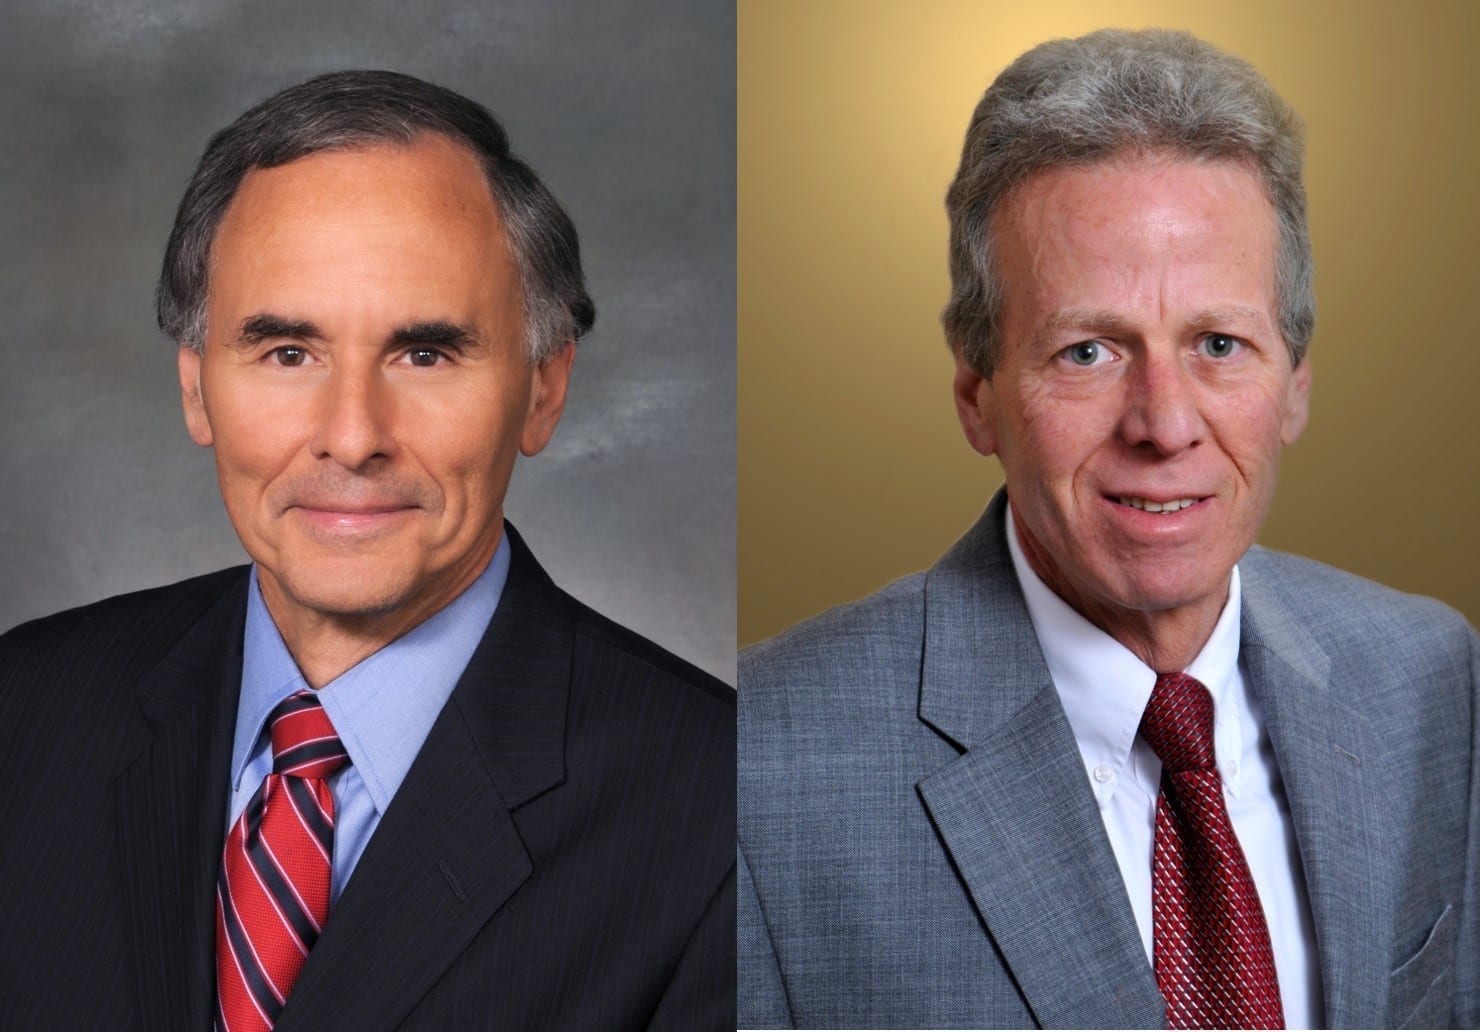 Charles M. Lax (left) and Marc S. Wise (right); images courtesy of Maddin Hauser.